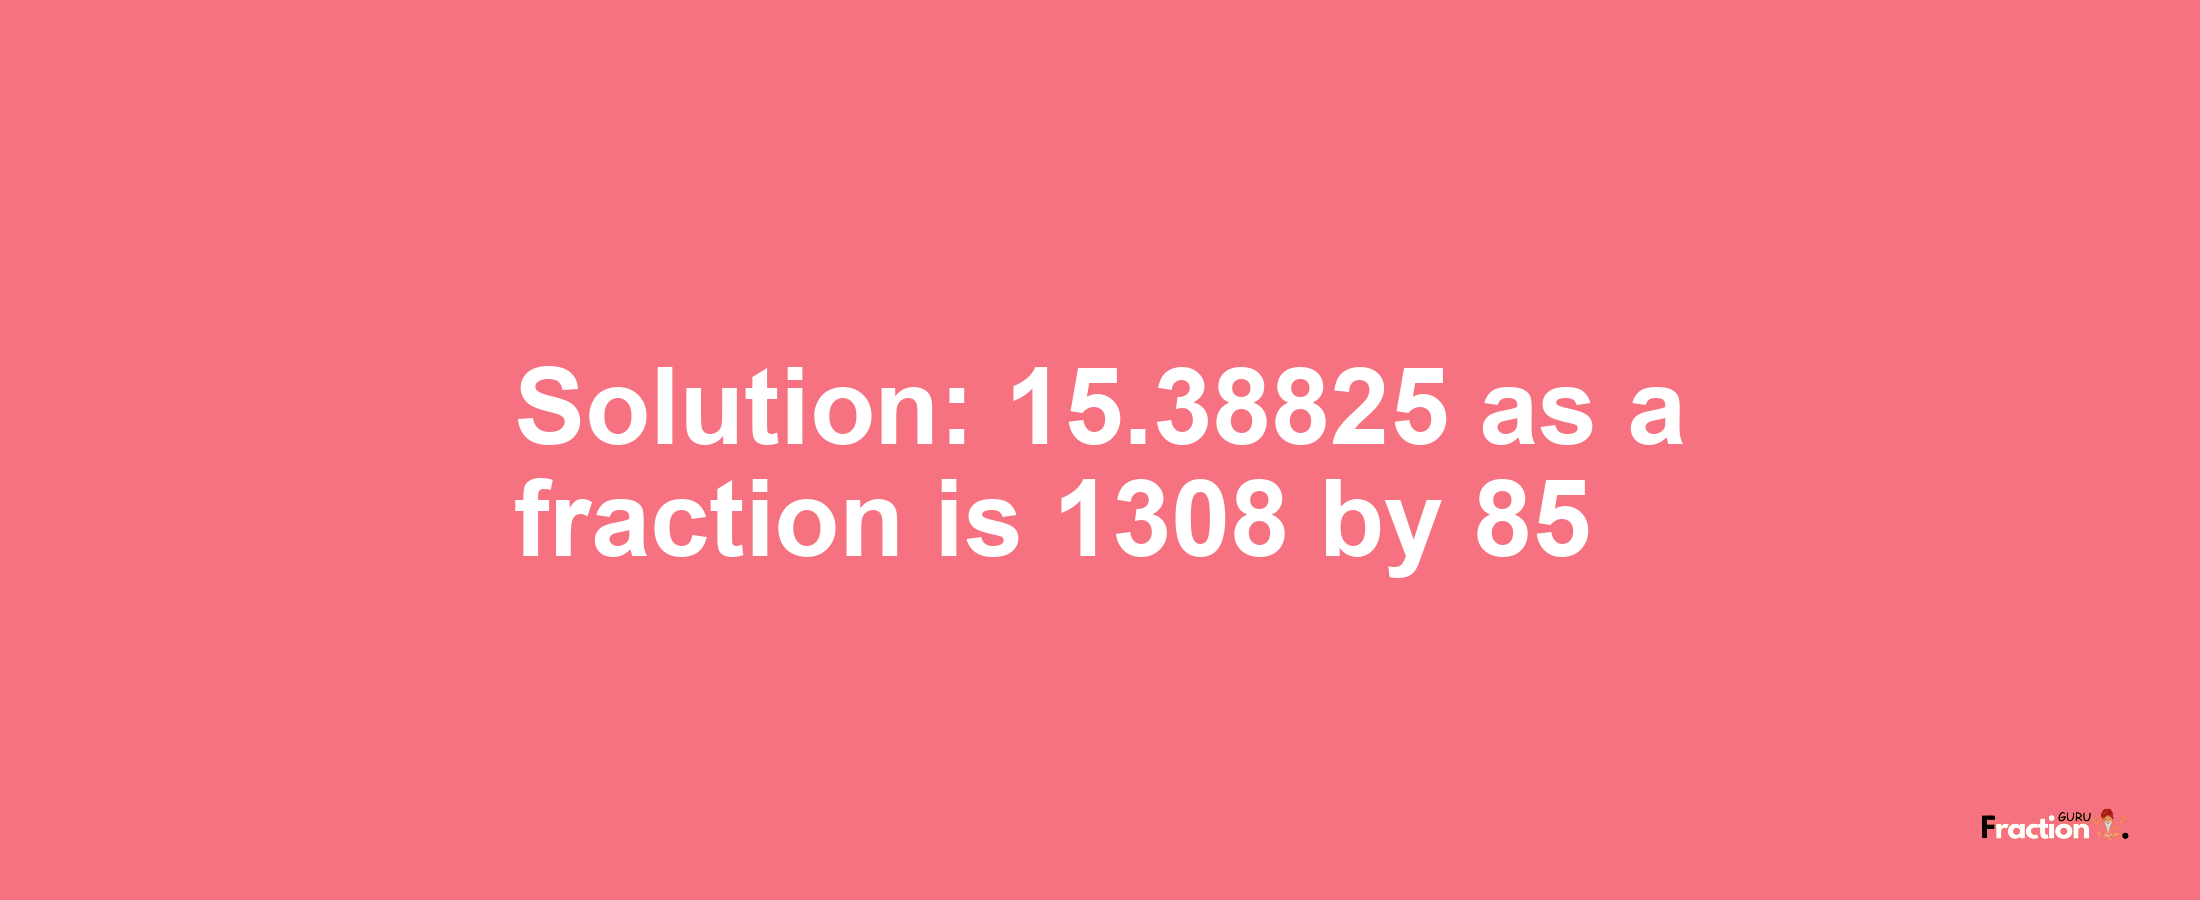 Solution:15.38825 as a fraction is 1308/85